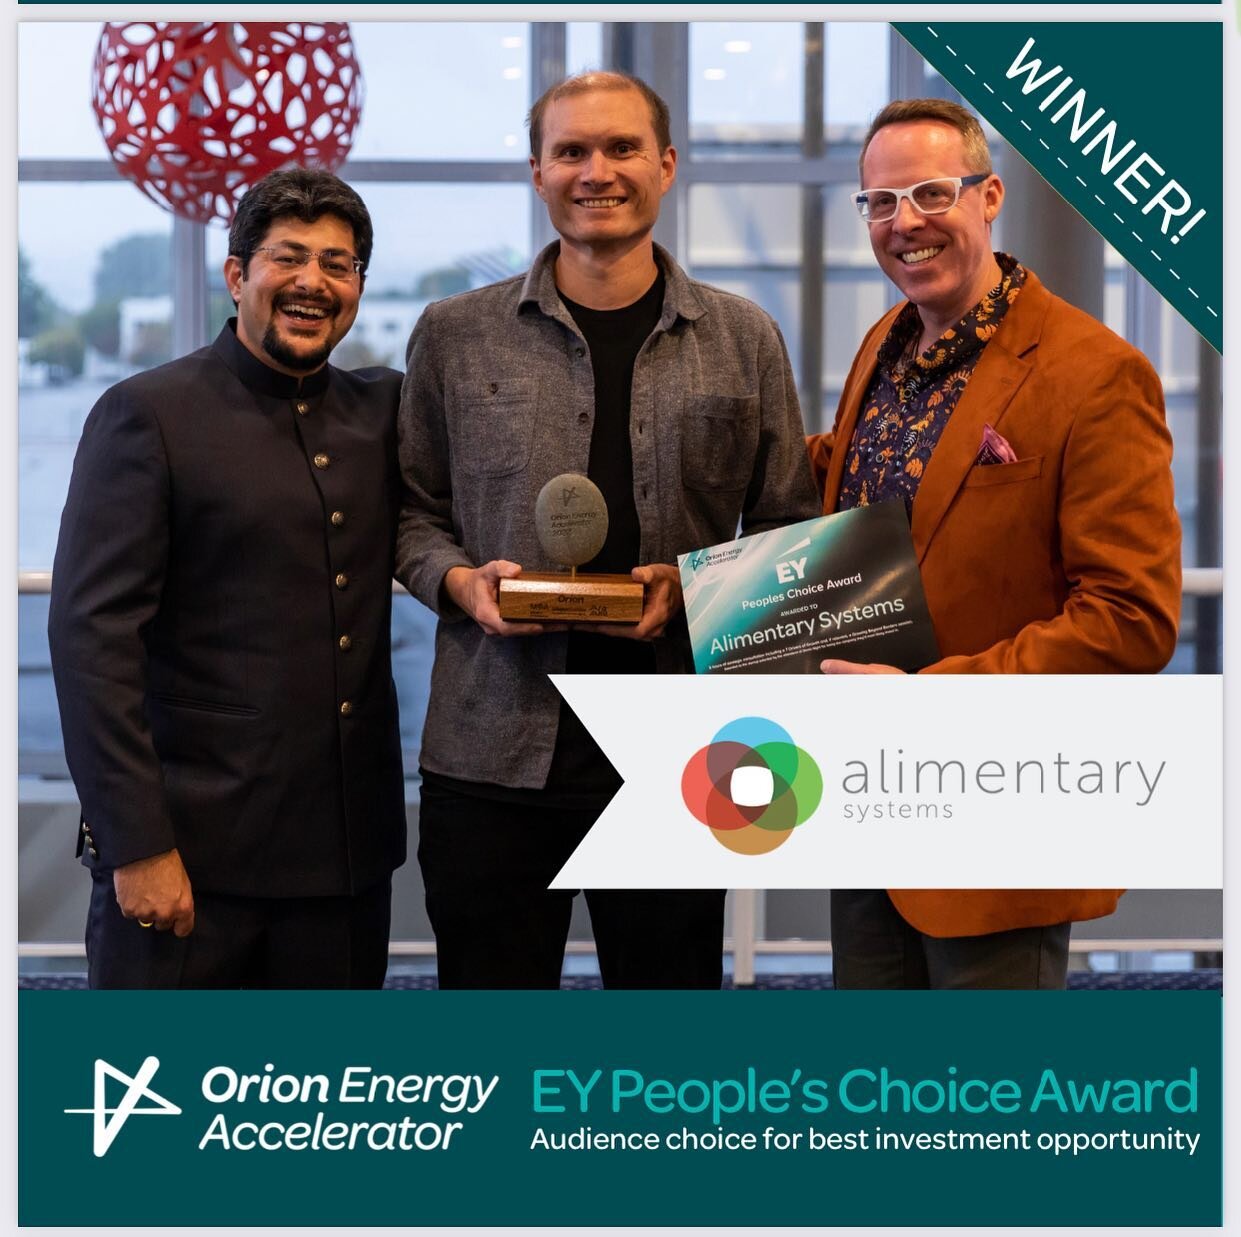 People&rsquo;s Choice Award - Orion Energy Accelerator